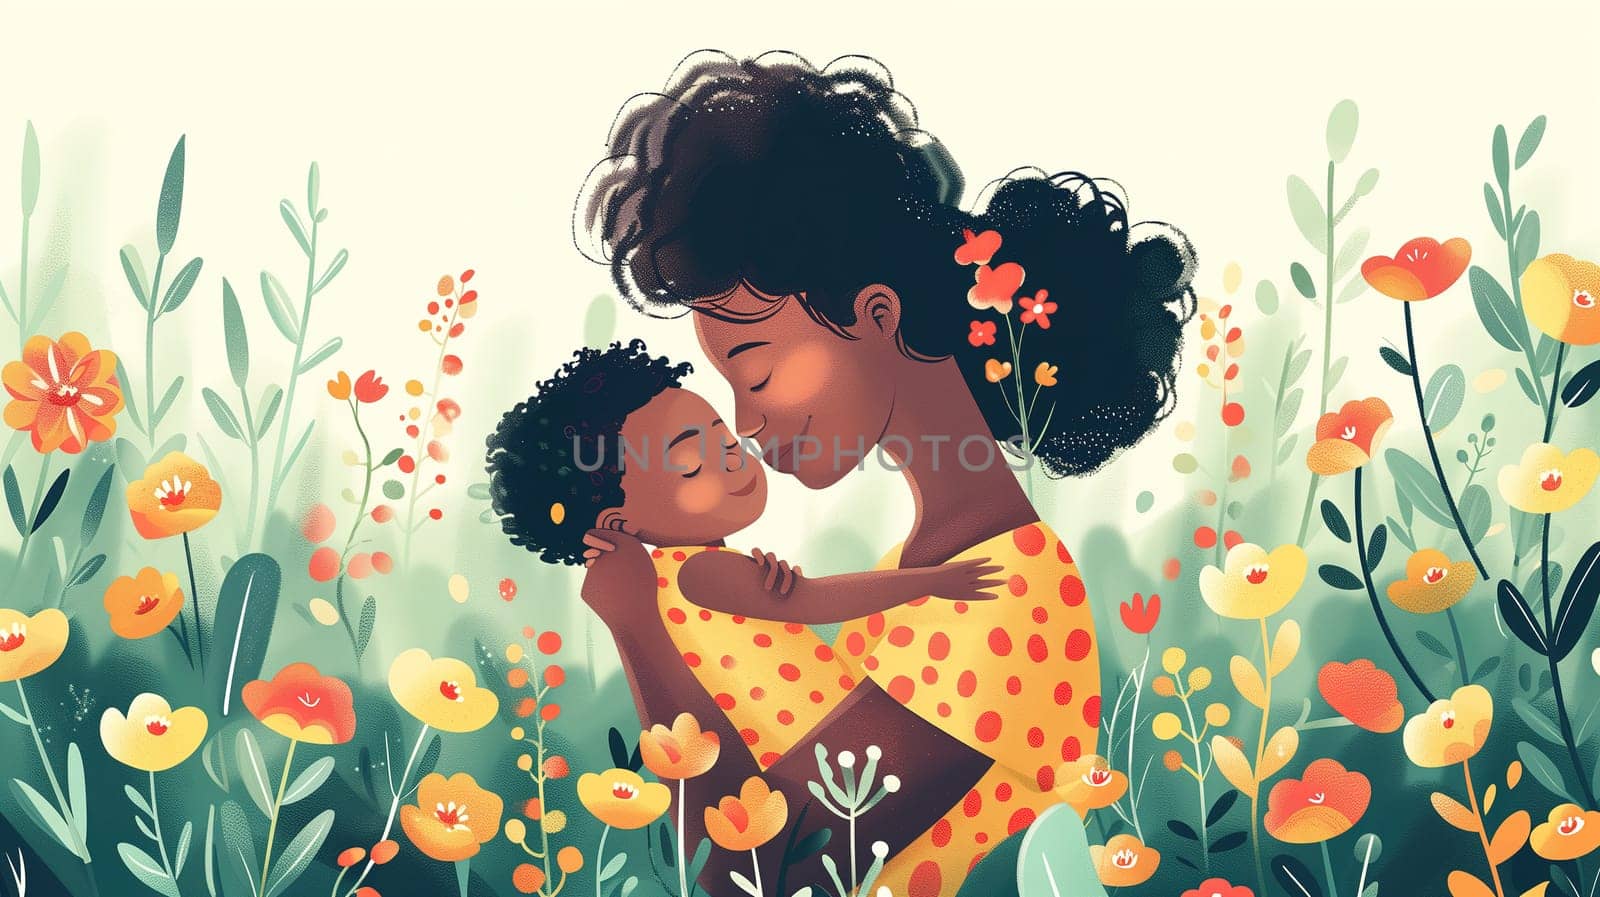 Woman Holding Child in Field of Flowers by TRMK